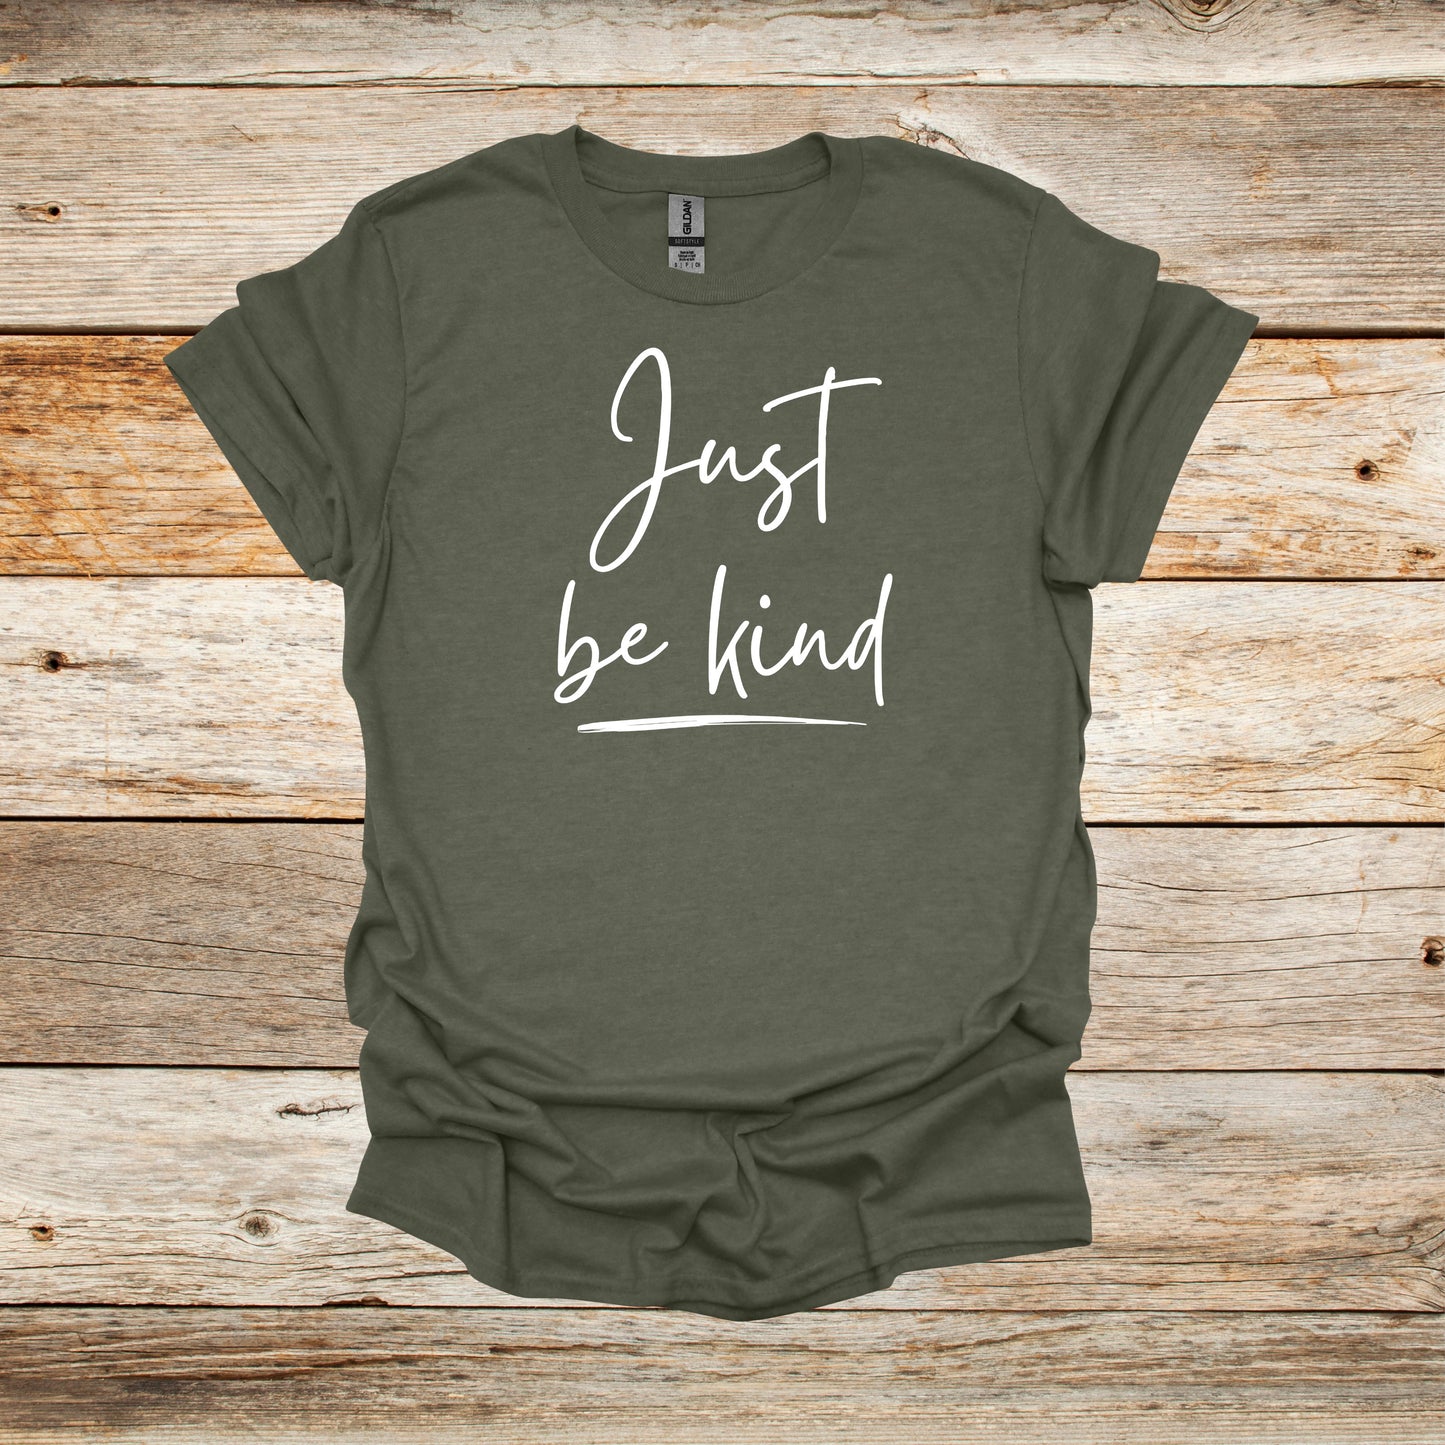 Sayings T-Shirt - Just Be Kind - Men's and Women's Tee Shirts - Sayings T-Shirts Graphic Avenue Heather Military Green Adult Small 